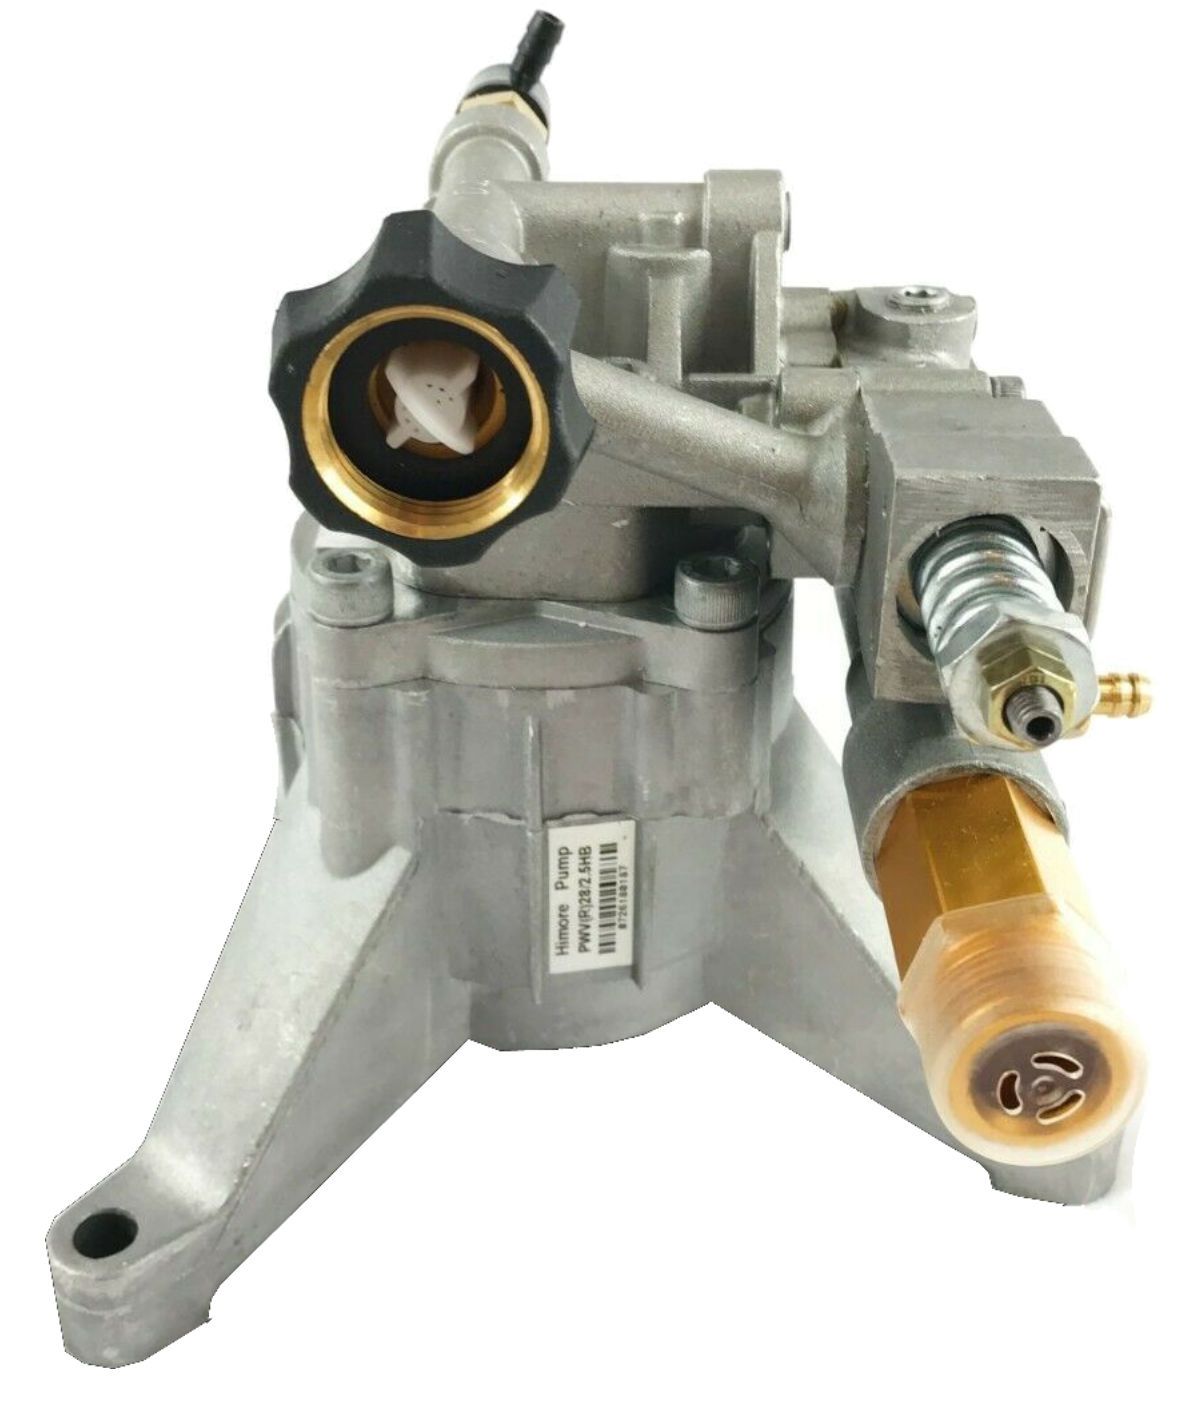 2700 PSI PRESSURE WASHER WATER PUMP Campbell Hausfeld PW205015LE - AE-Power